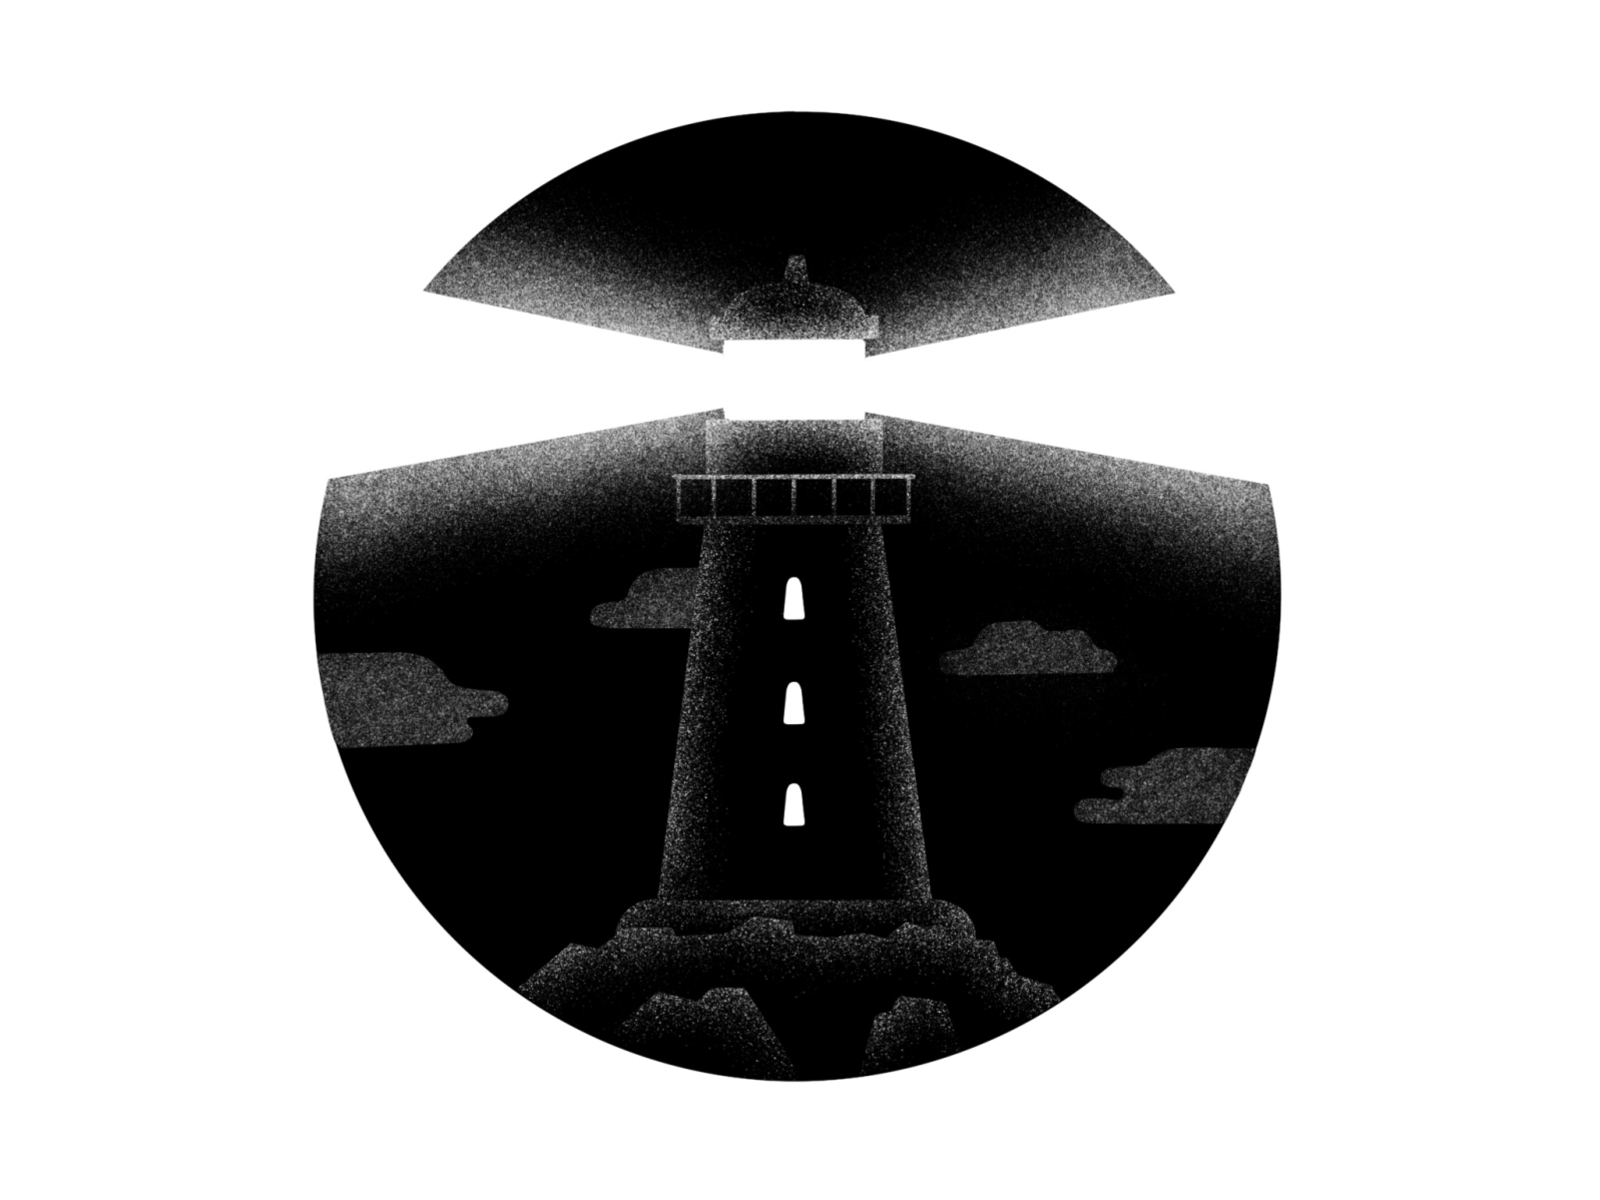 Inktober #10 - Hope black and white clouds dark grain hope illustration ink inktober inktober2020 inktober52 light lighthouse night rocks sea texture thierry fousse tower